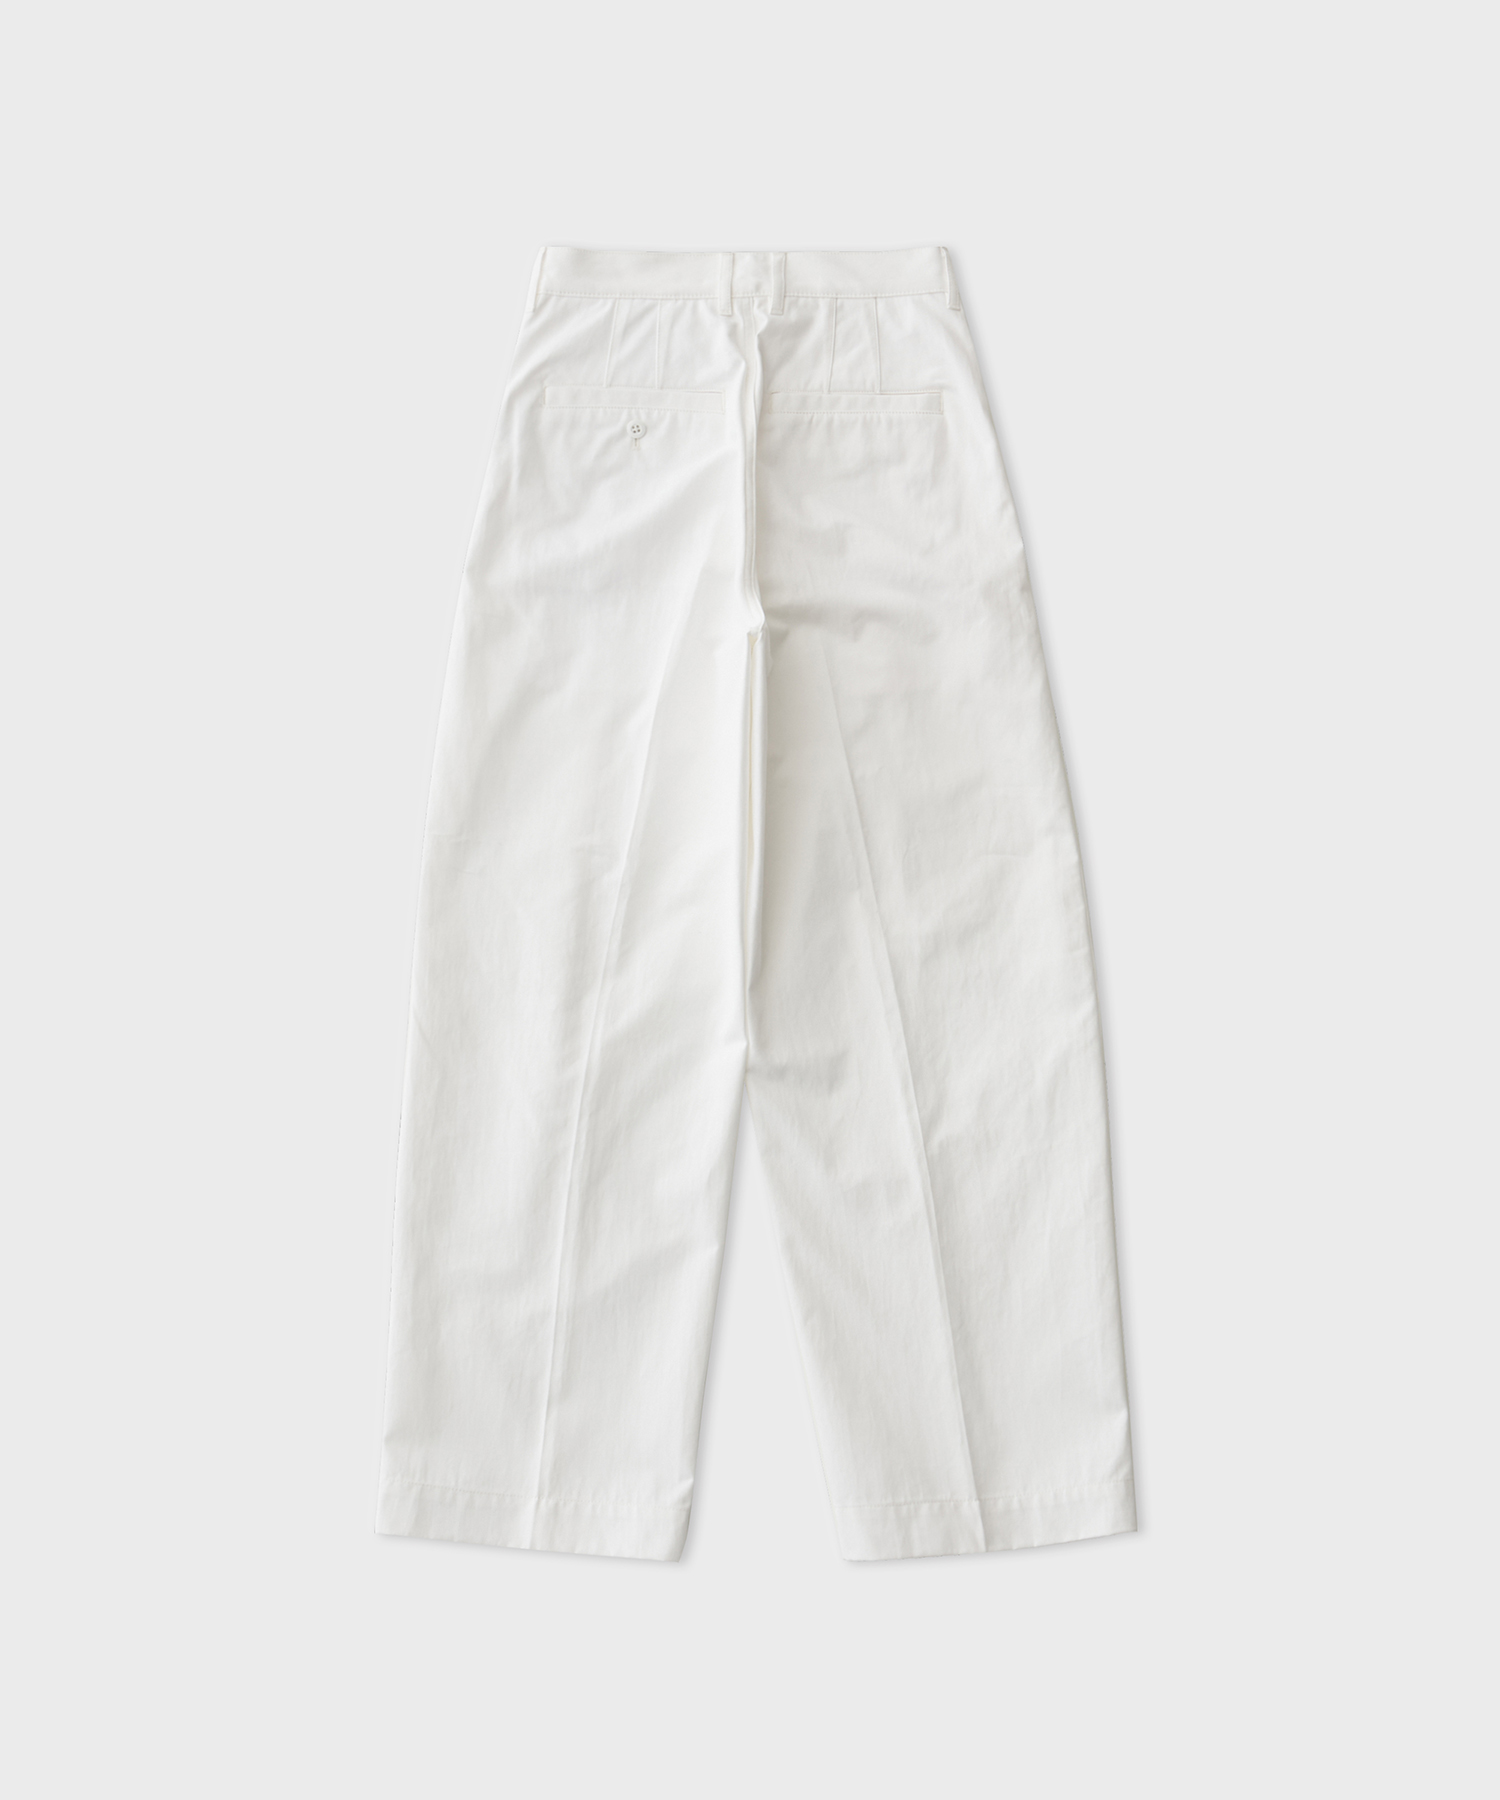 Cotton Twill 2 Tuck Trousers (White)